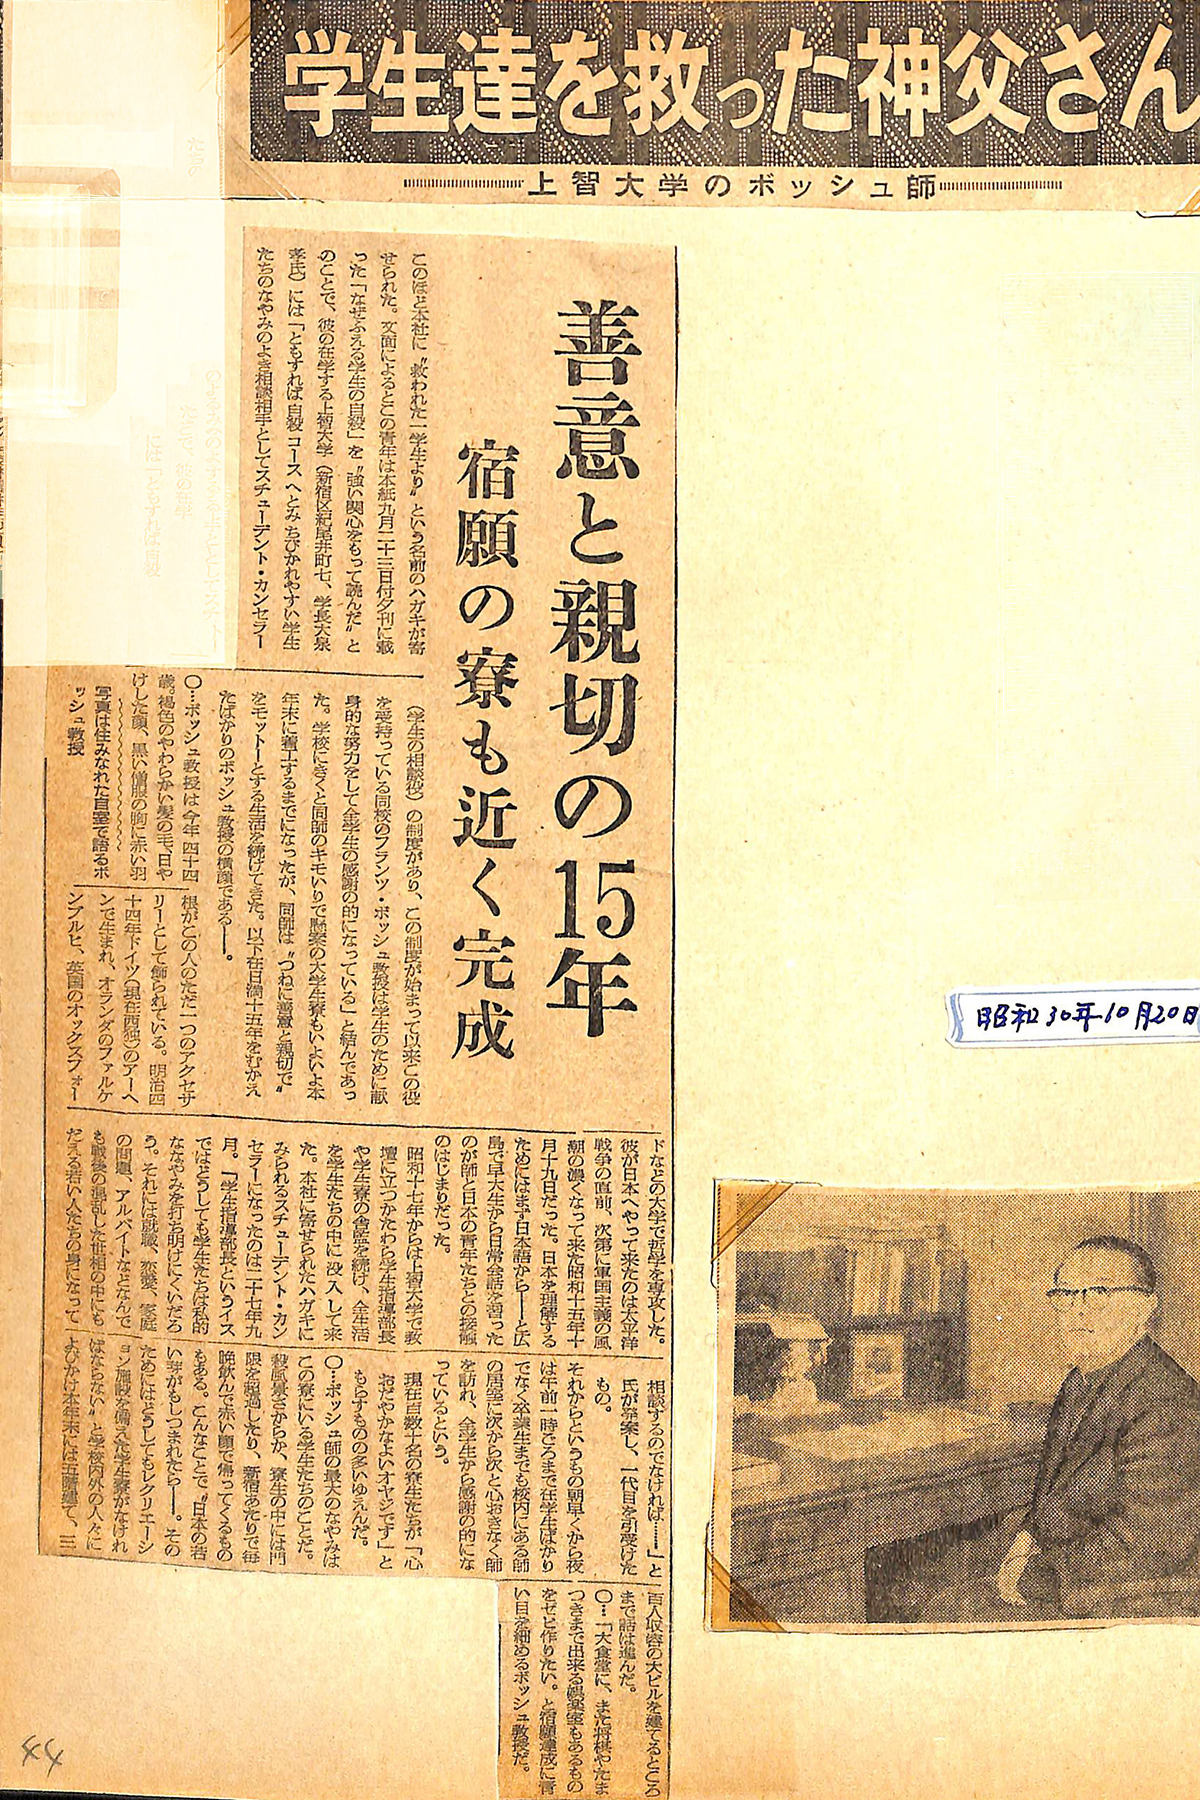 A scrap of an article reporting on Father Bosch’s efforts to build the Sophia House men’s dormitory, published in the Nihon Keizai Shimbun newspaper on October 20, 1955 (from Father Bosch’s personal album)